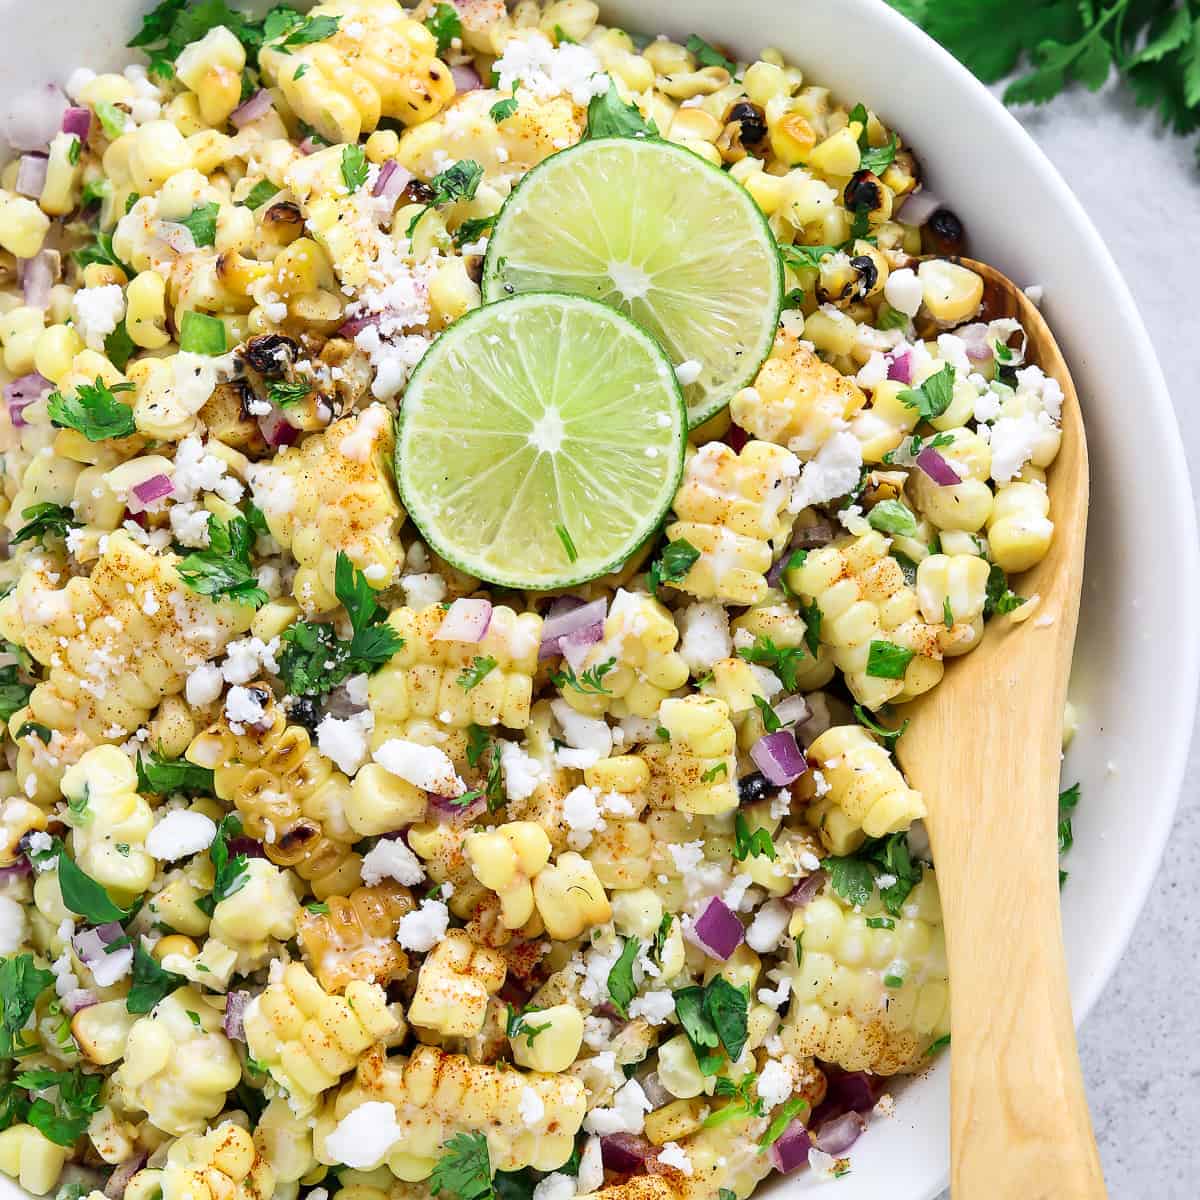 Bowl of Mexican corn salad with lime garnish.